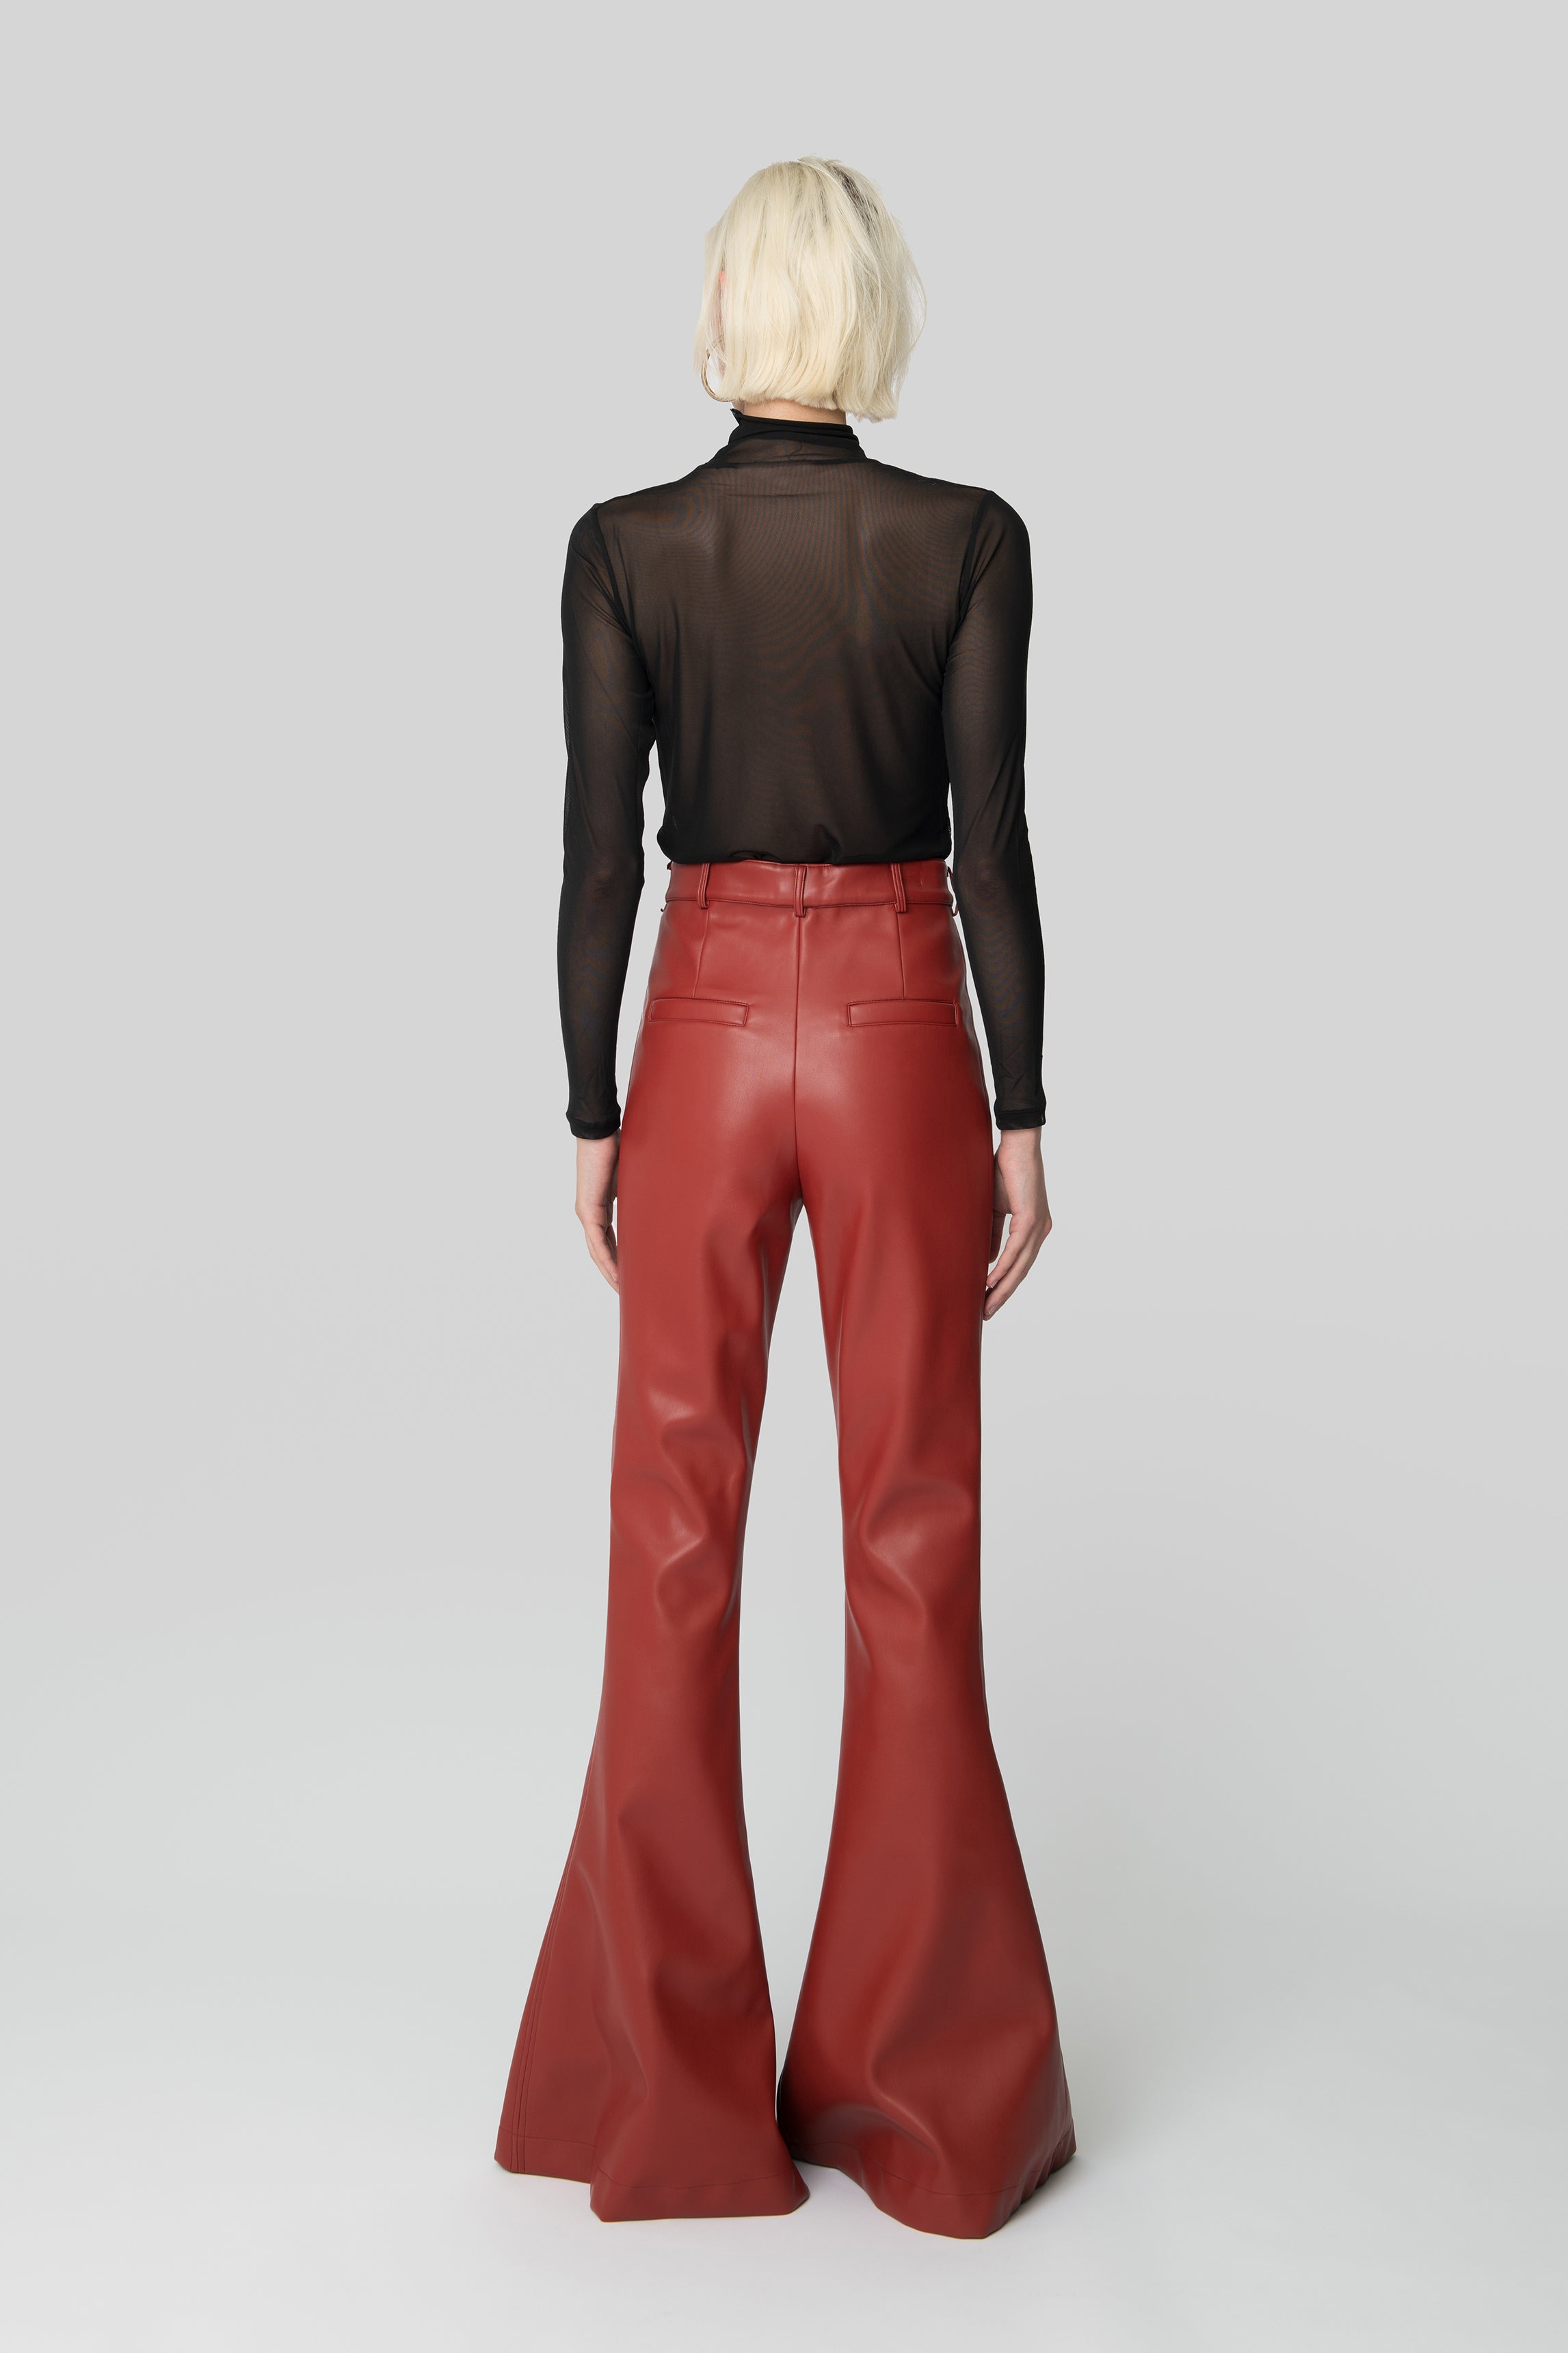 The Brick Red Leather Bianca Pants